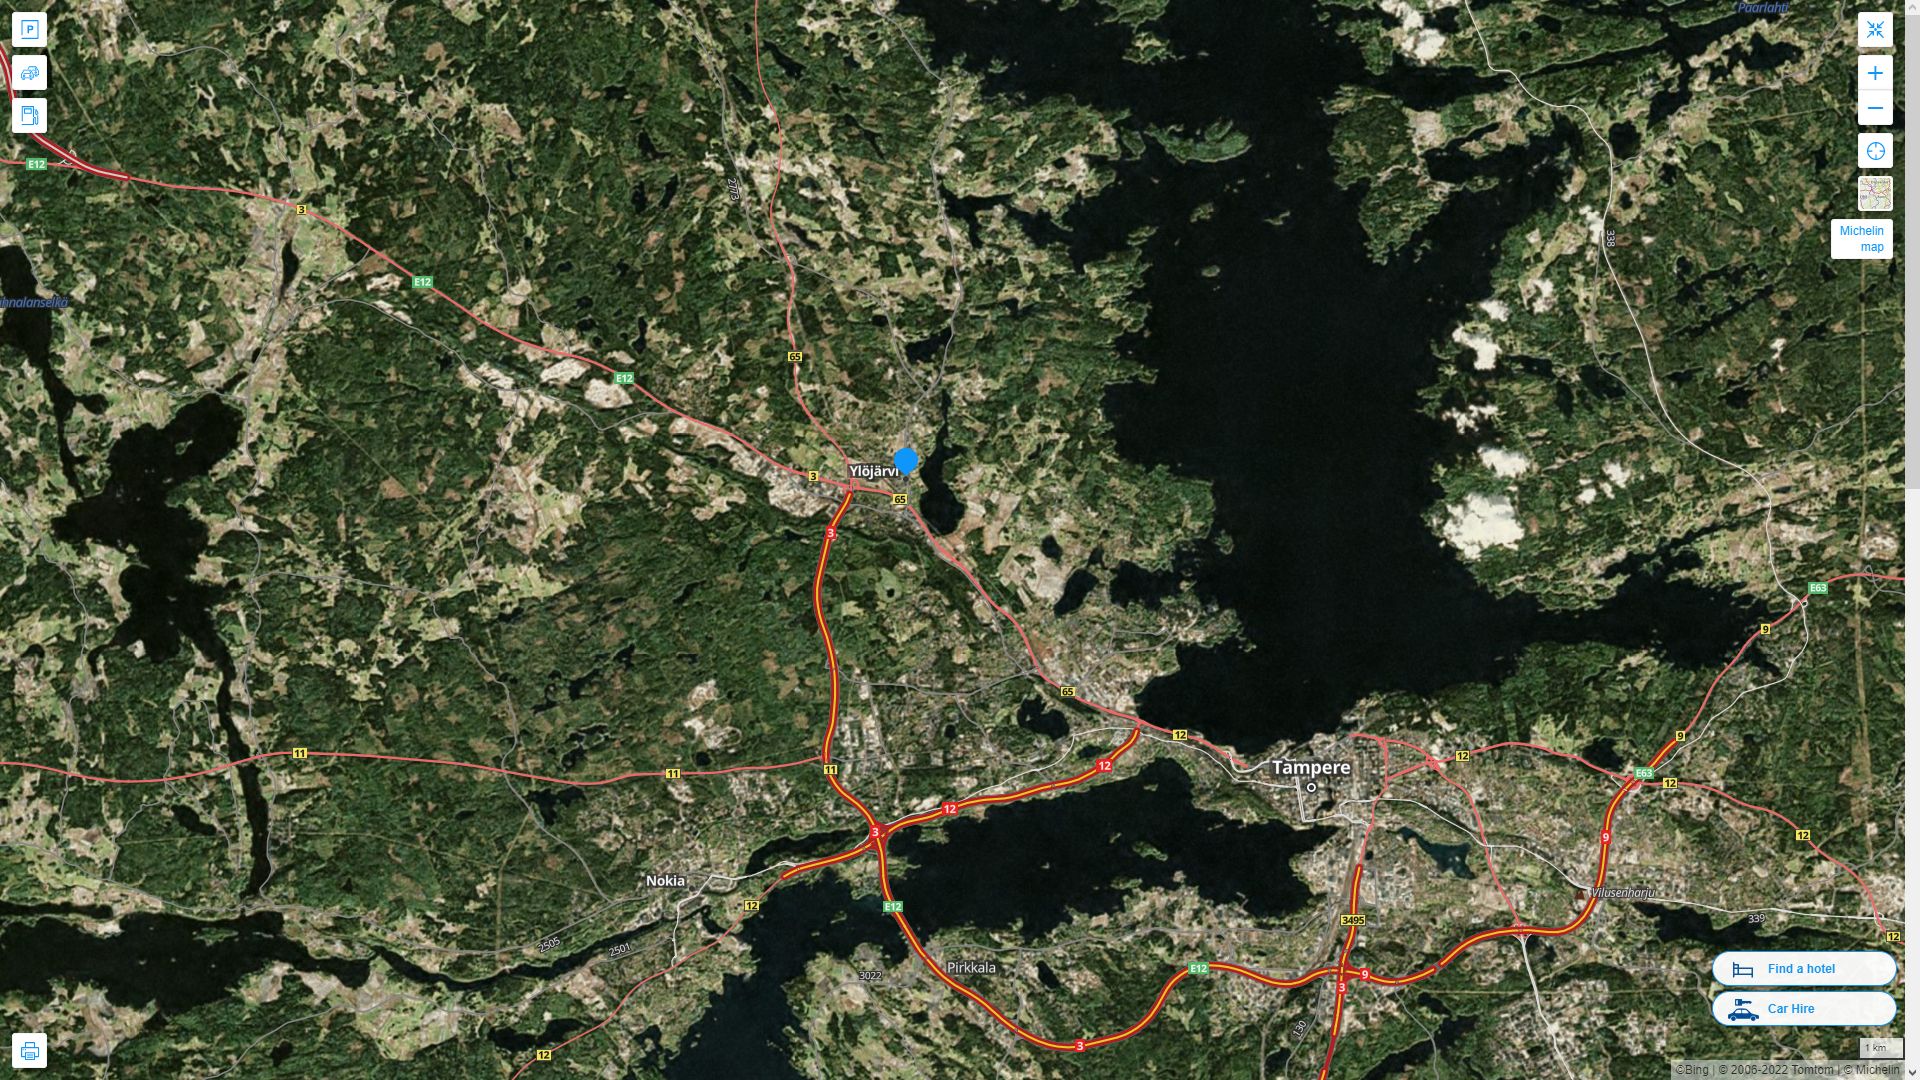 Ylojarvi Highway and Road Map with Satellite View